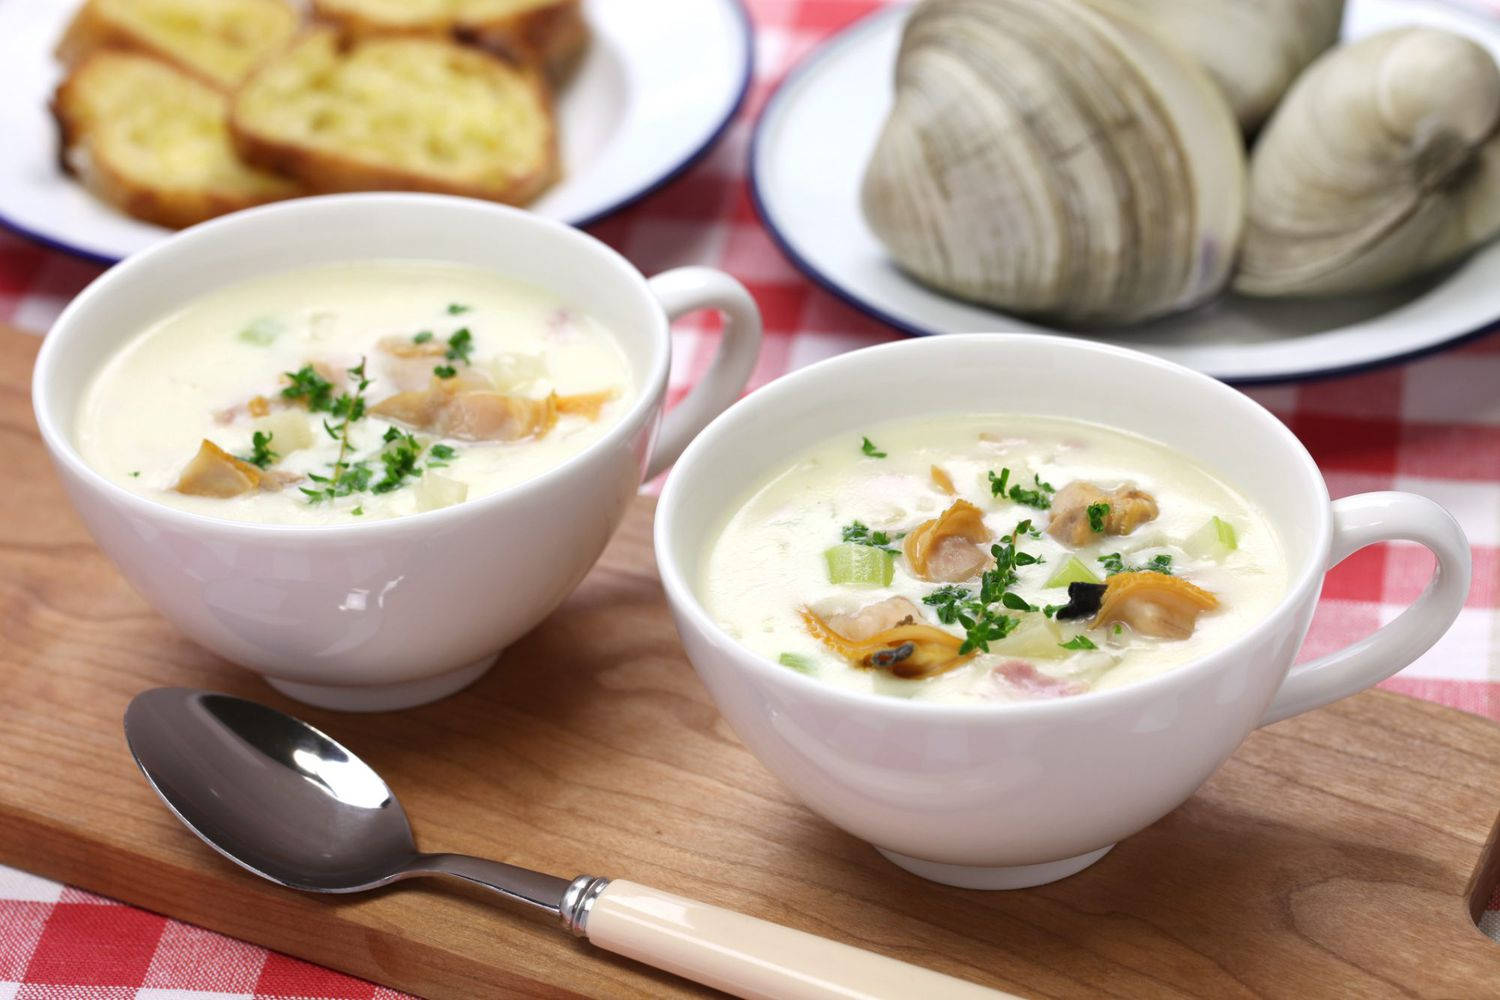 Delightful New England Clam Chowder with Toasted Bread Wallpaper